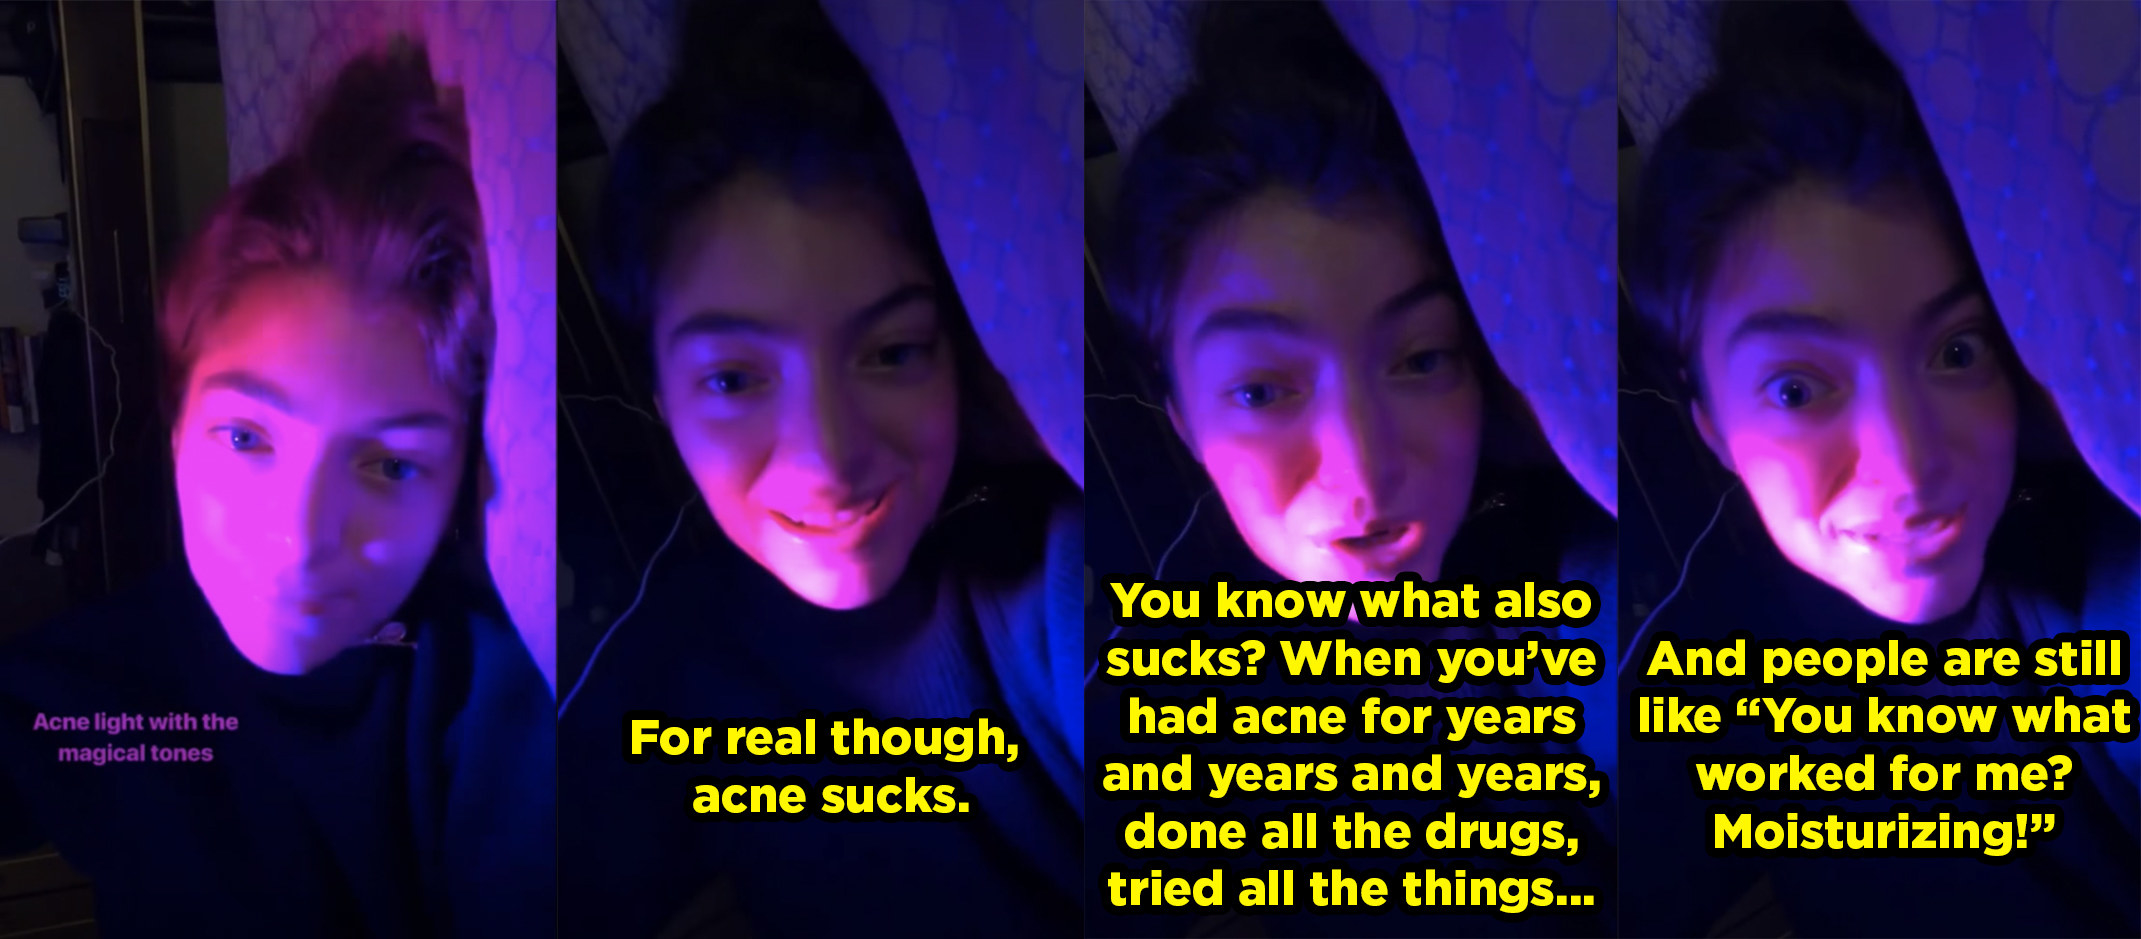 Lorde says, &quot;For real though, acne sucks. You know what also sucks? When you’ve had acne for years and years and years, done all the drugs, tried all the things and people are still like &#x27;You know what worked for me? Moisturizing!&#x27;&quot;